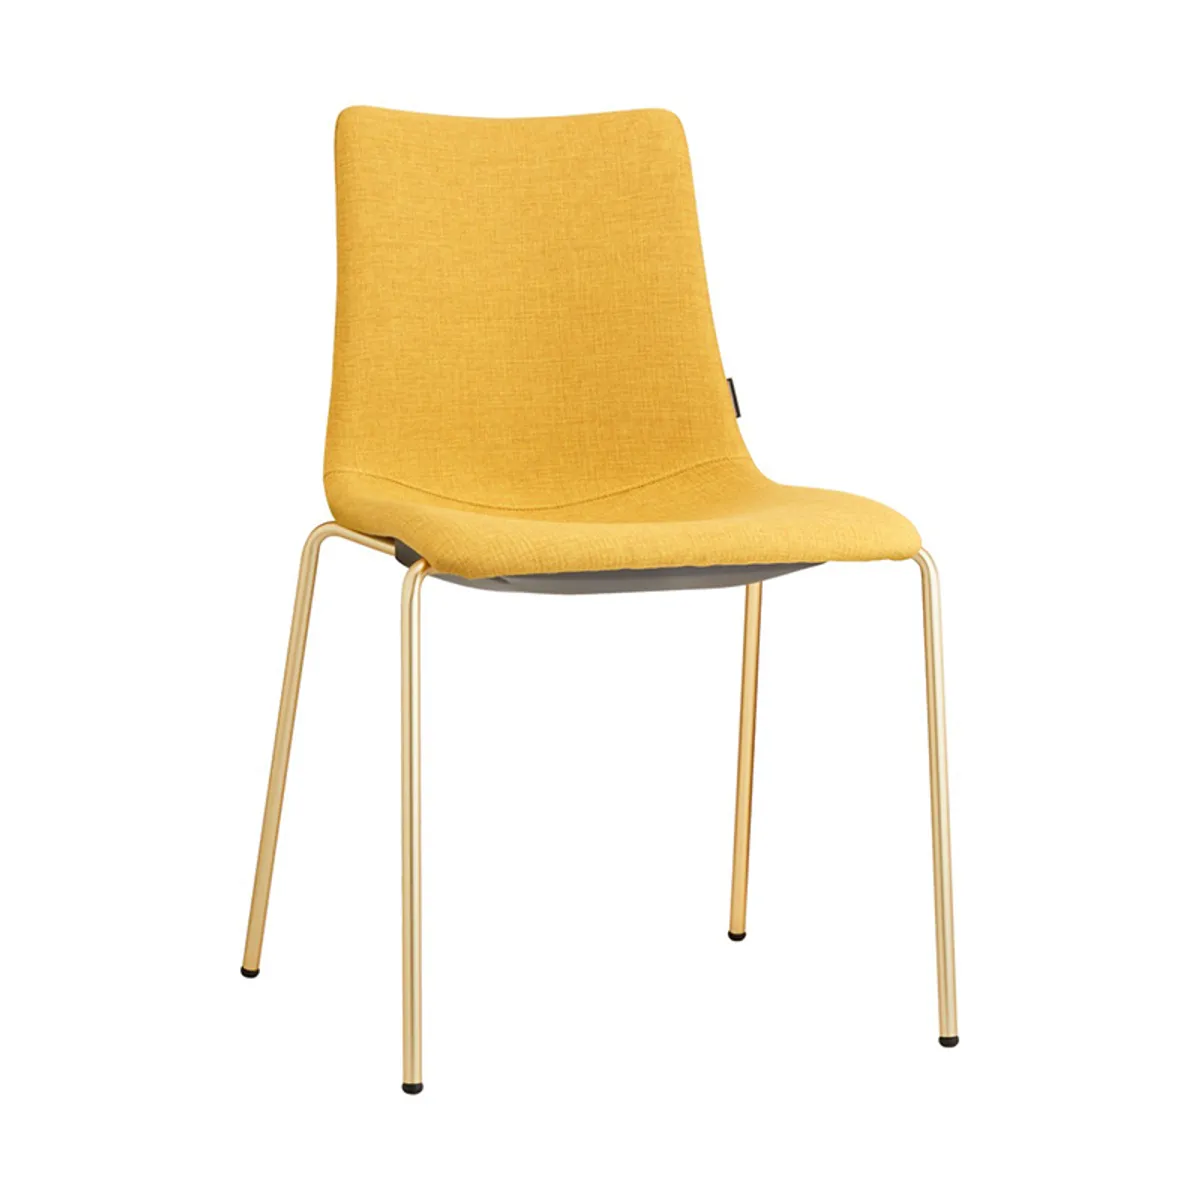 Selina Side Chair With Metal Legs And Yellow Upholstery Stacking Chair For Cafes By Insideoutcontracts